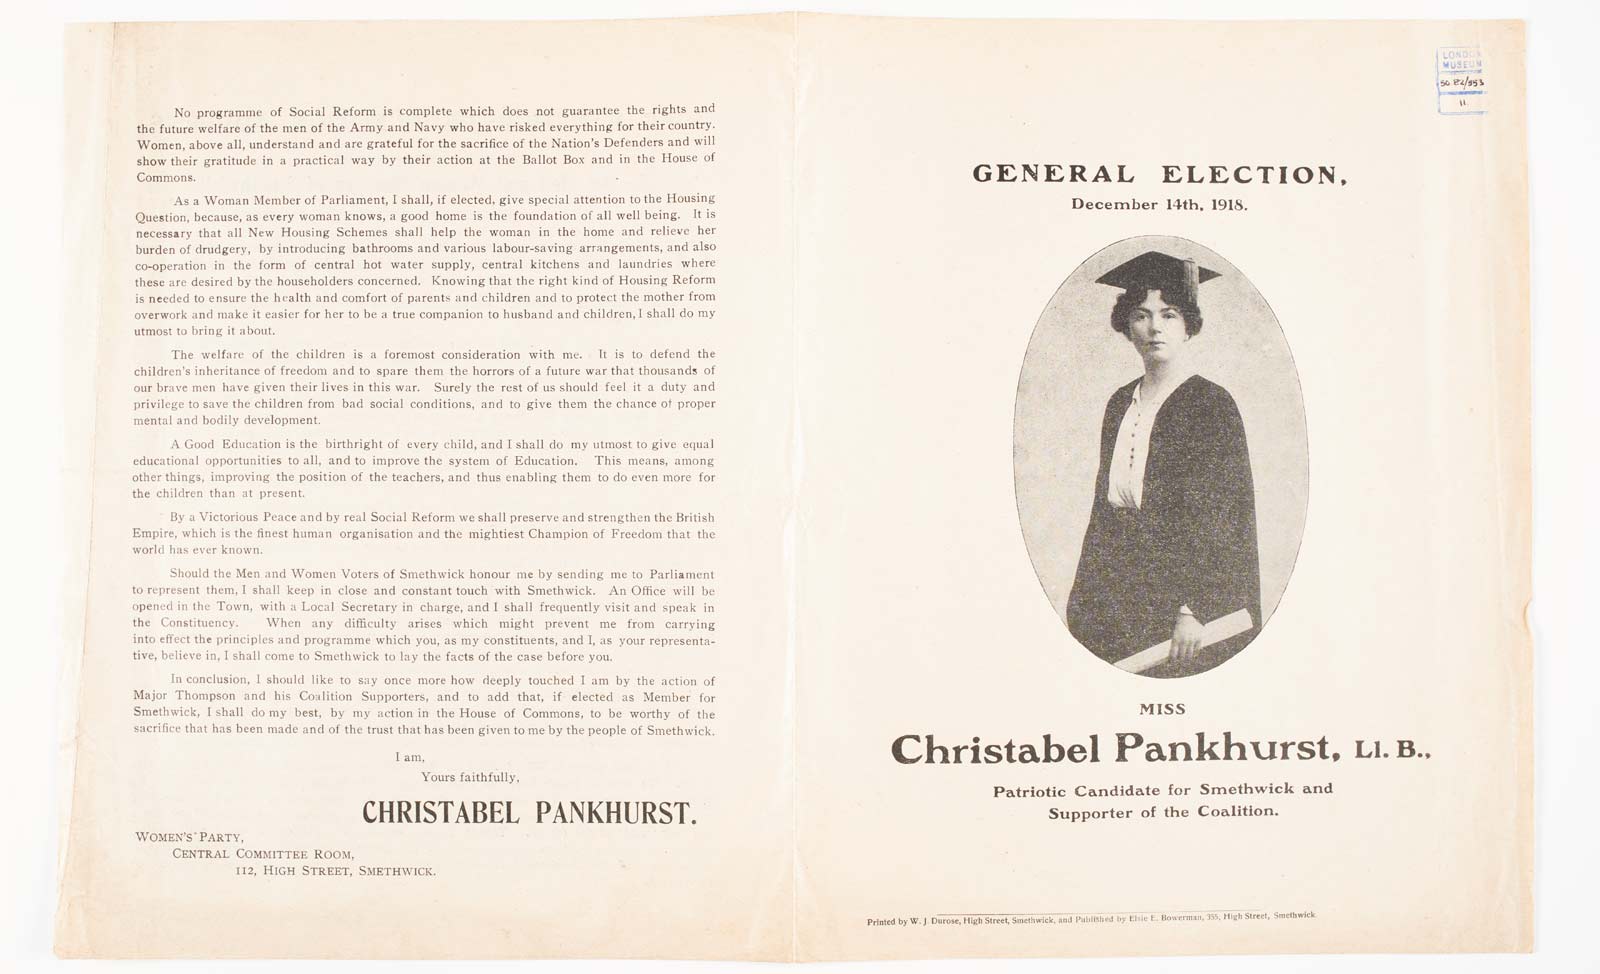 Campaign leaflet issued by The Women's Party and Christabel Pankhurst for the General Election. December 14th, 1918. The leaflet is printed with Christabel Pankhurst's Election Address to the Men and Women Electors of Smethwick. 